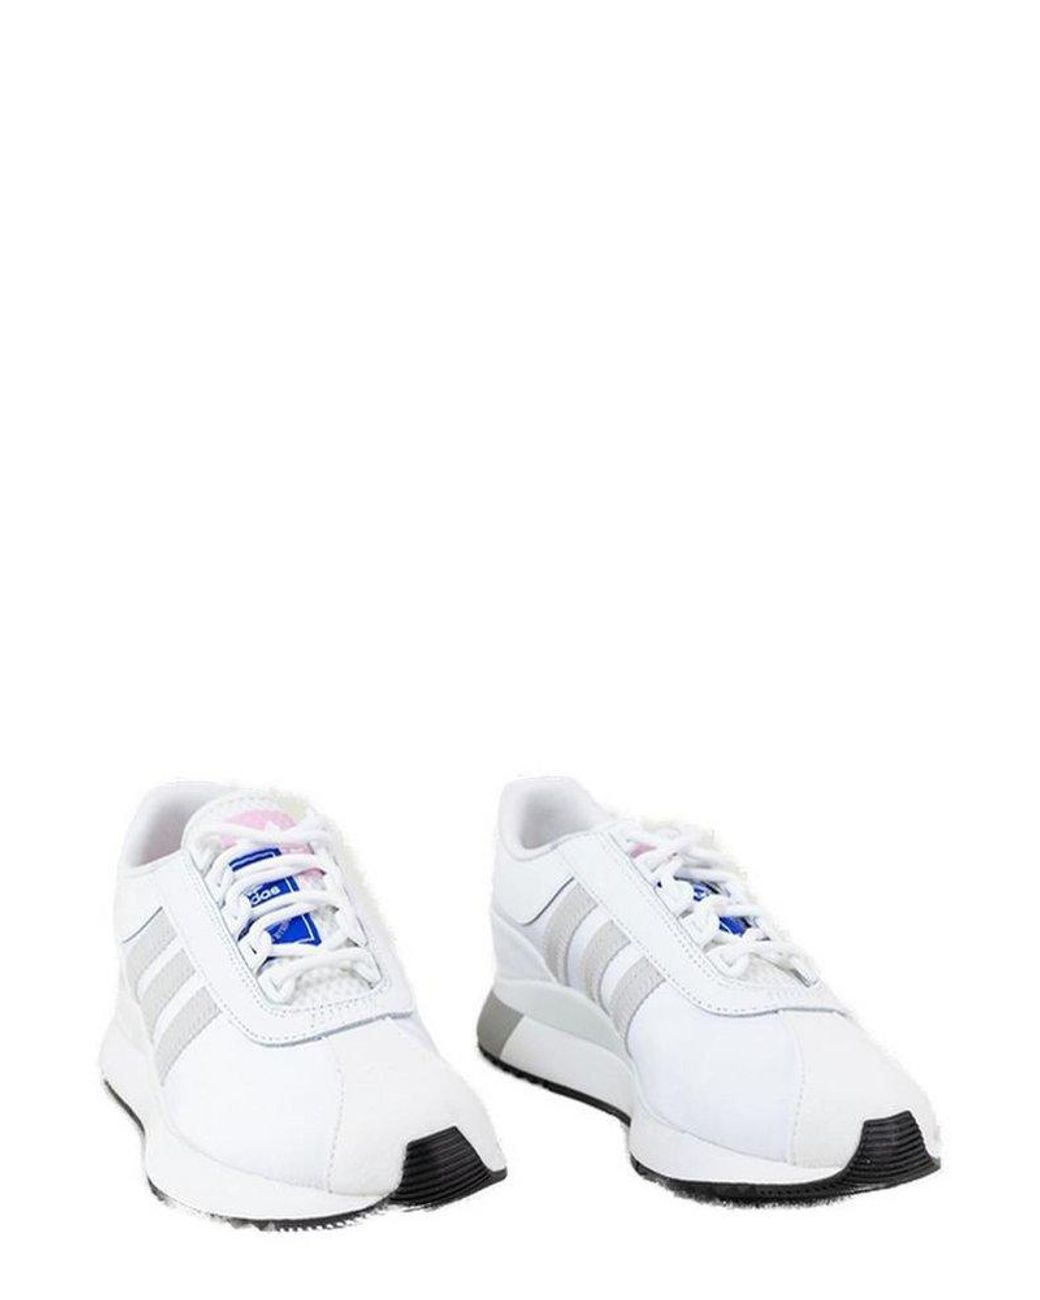 adidas Originals Suede Sl Andrige Lace-up Sneakers in White | Lyst